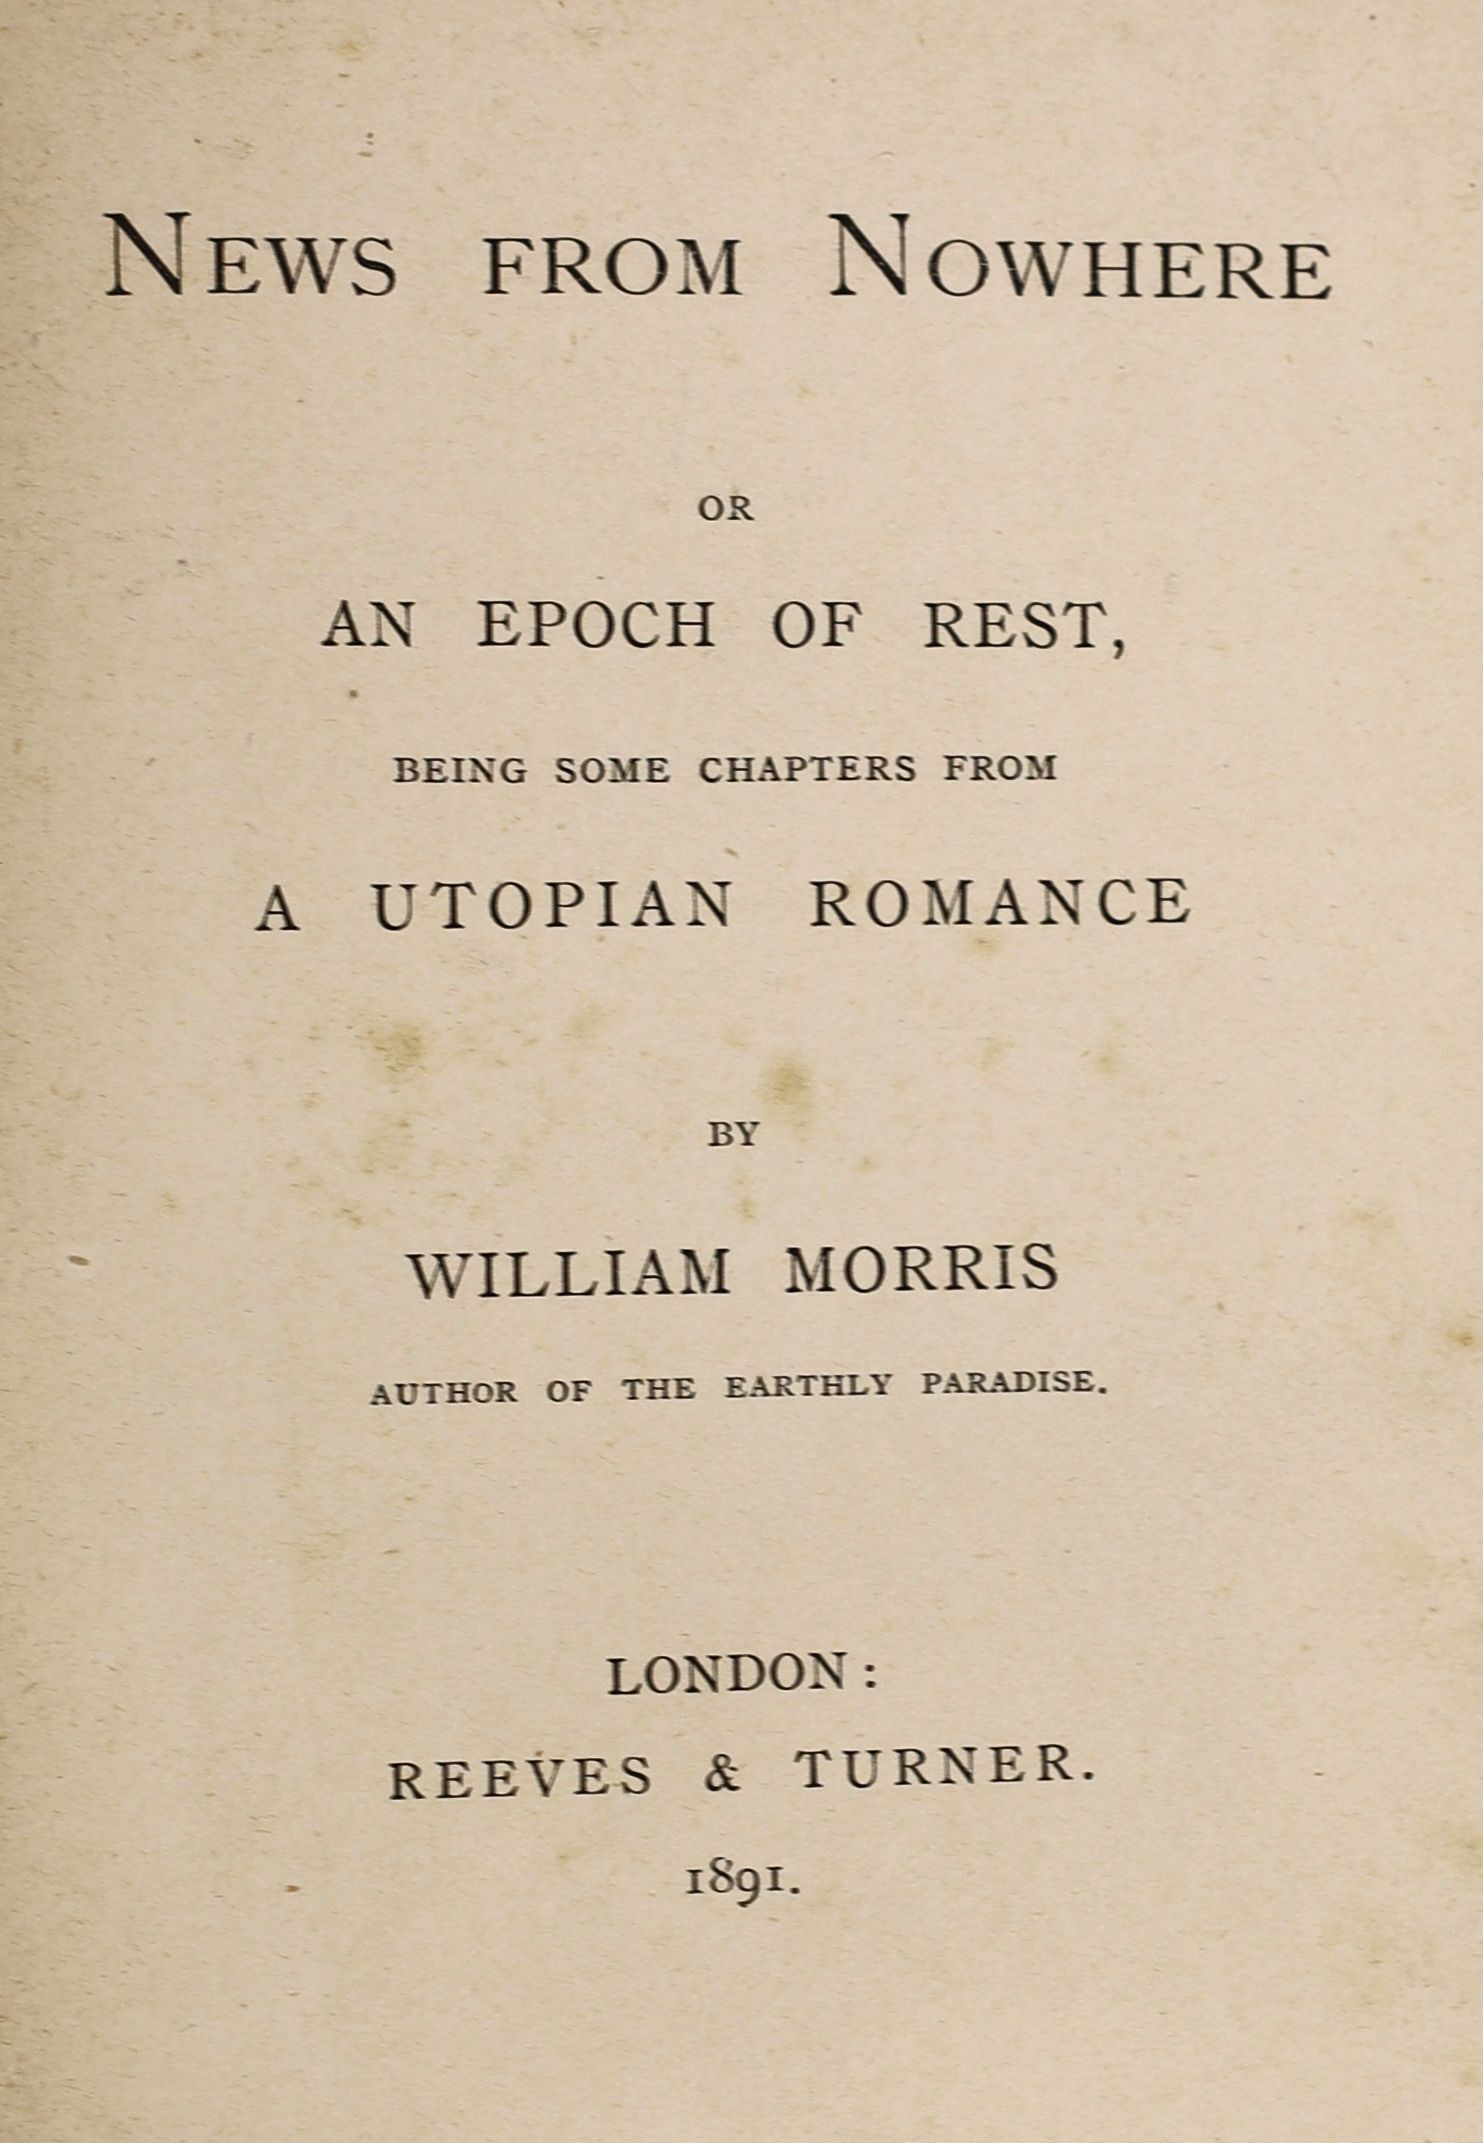 Socialism. - Utopia - Morris, William - News From Nowhere: or, An Epoch of Rest, being some chapters from a Utopian Romance, 1st edition in book form, 8vo, black cloth, gilt titling, Reeves & Turner, London, 1891